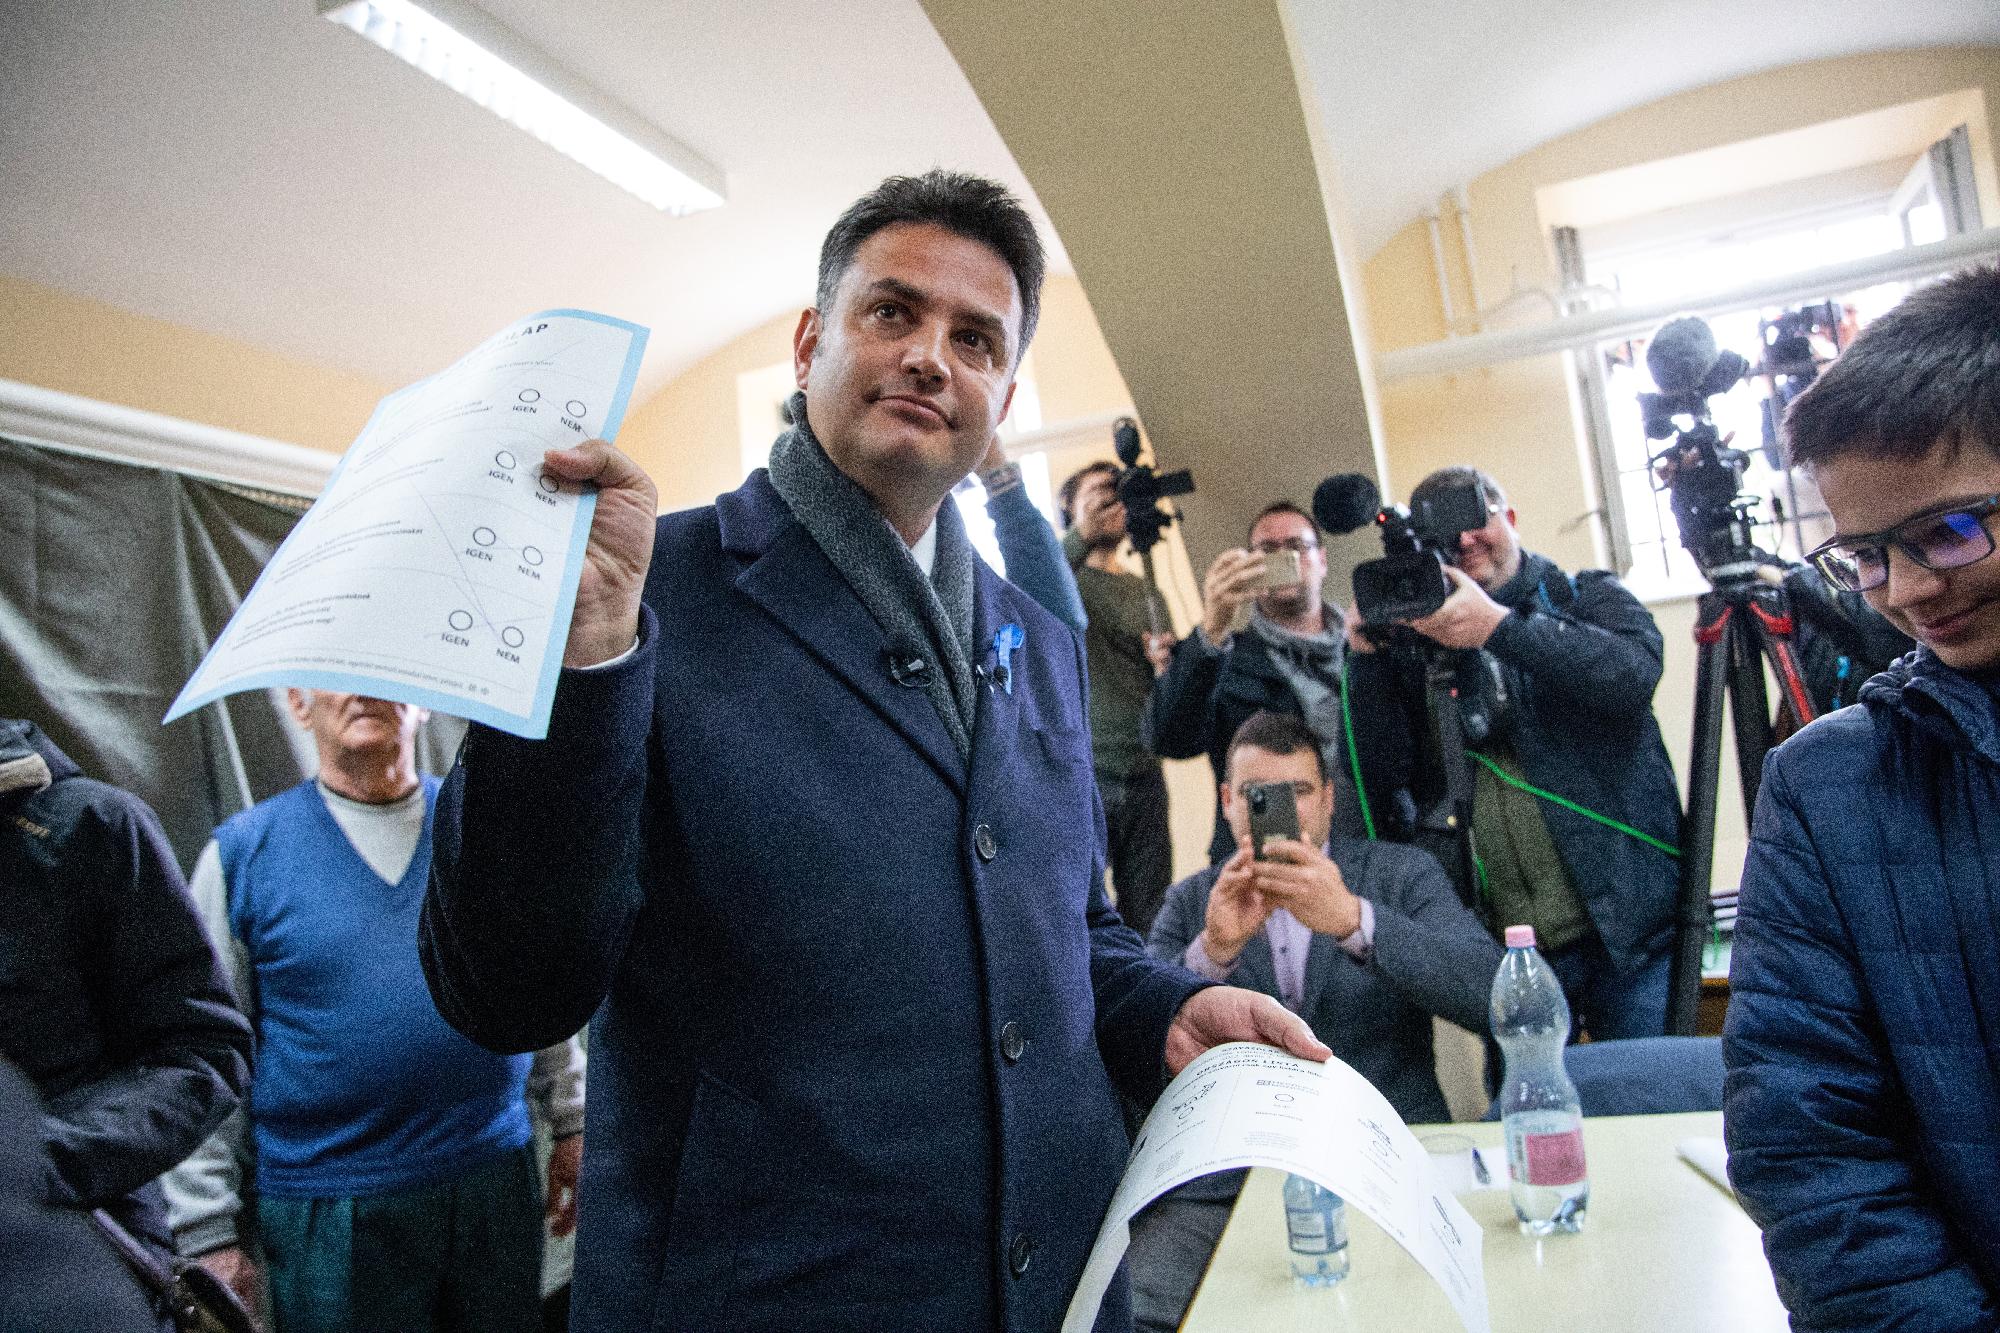 Child Protection Referendum in Hungary Falls Short of Validity Threshold